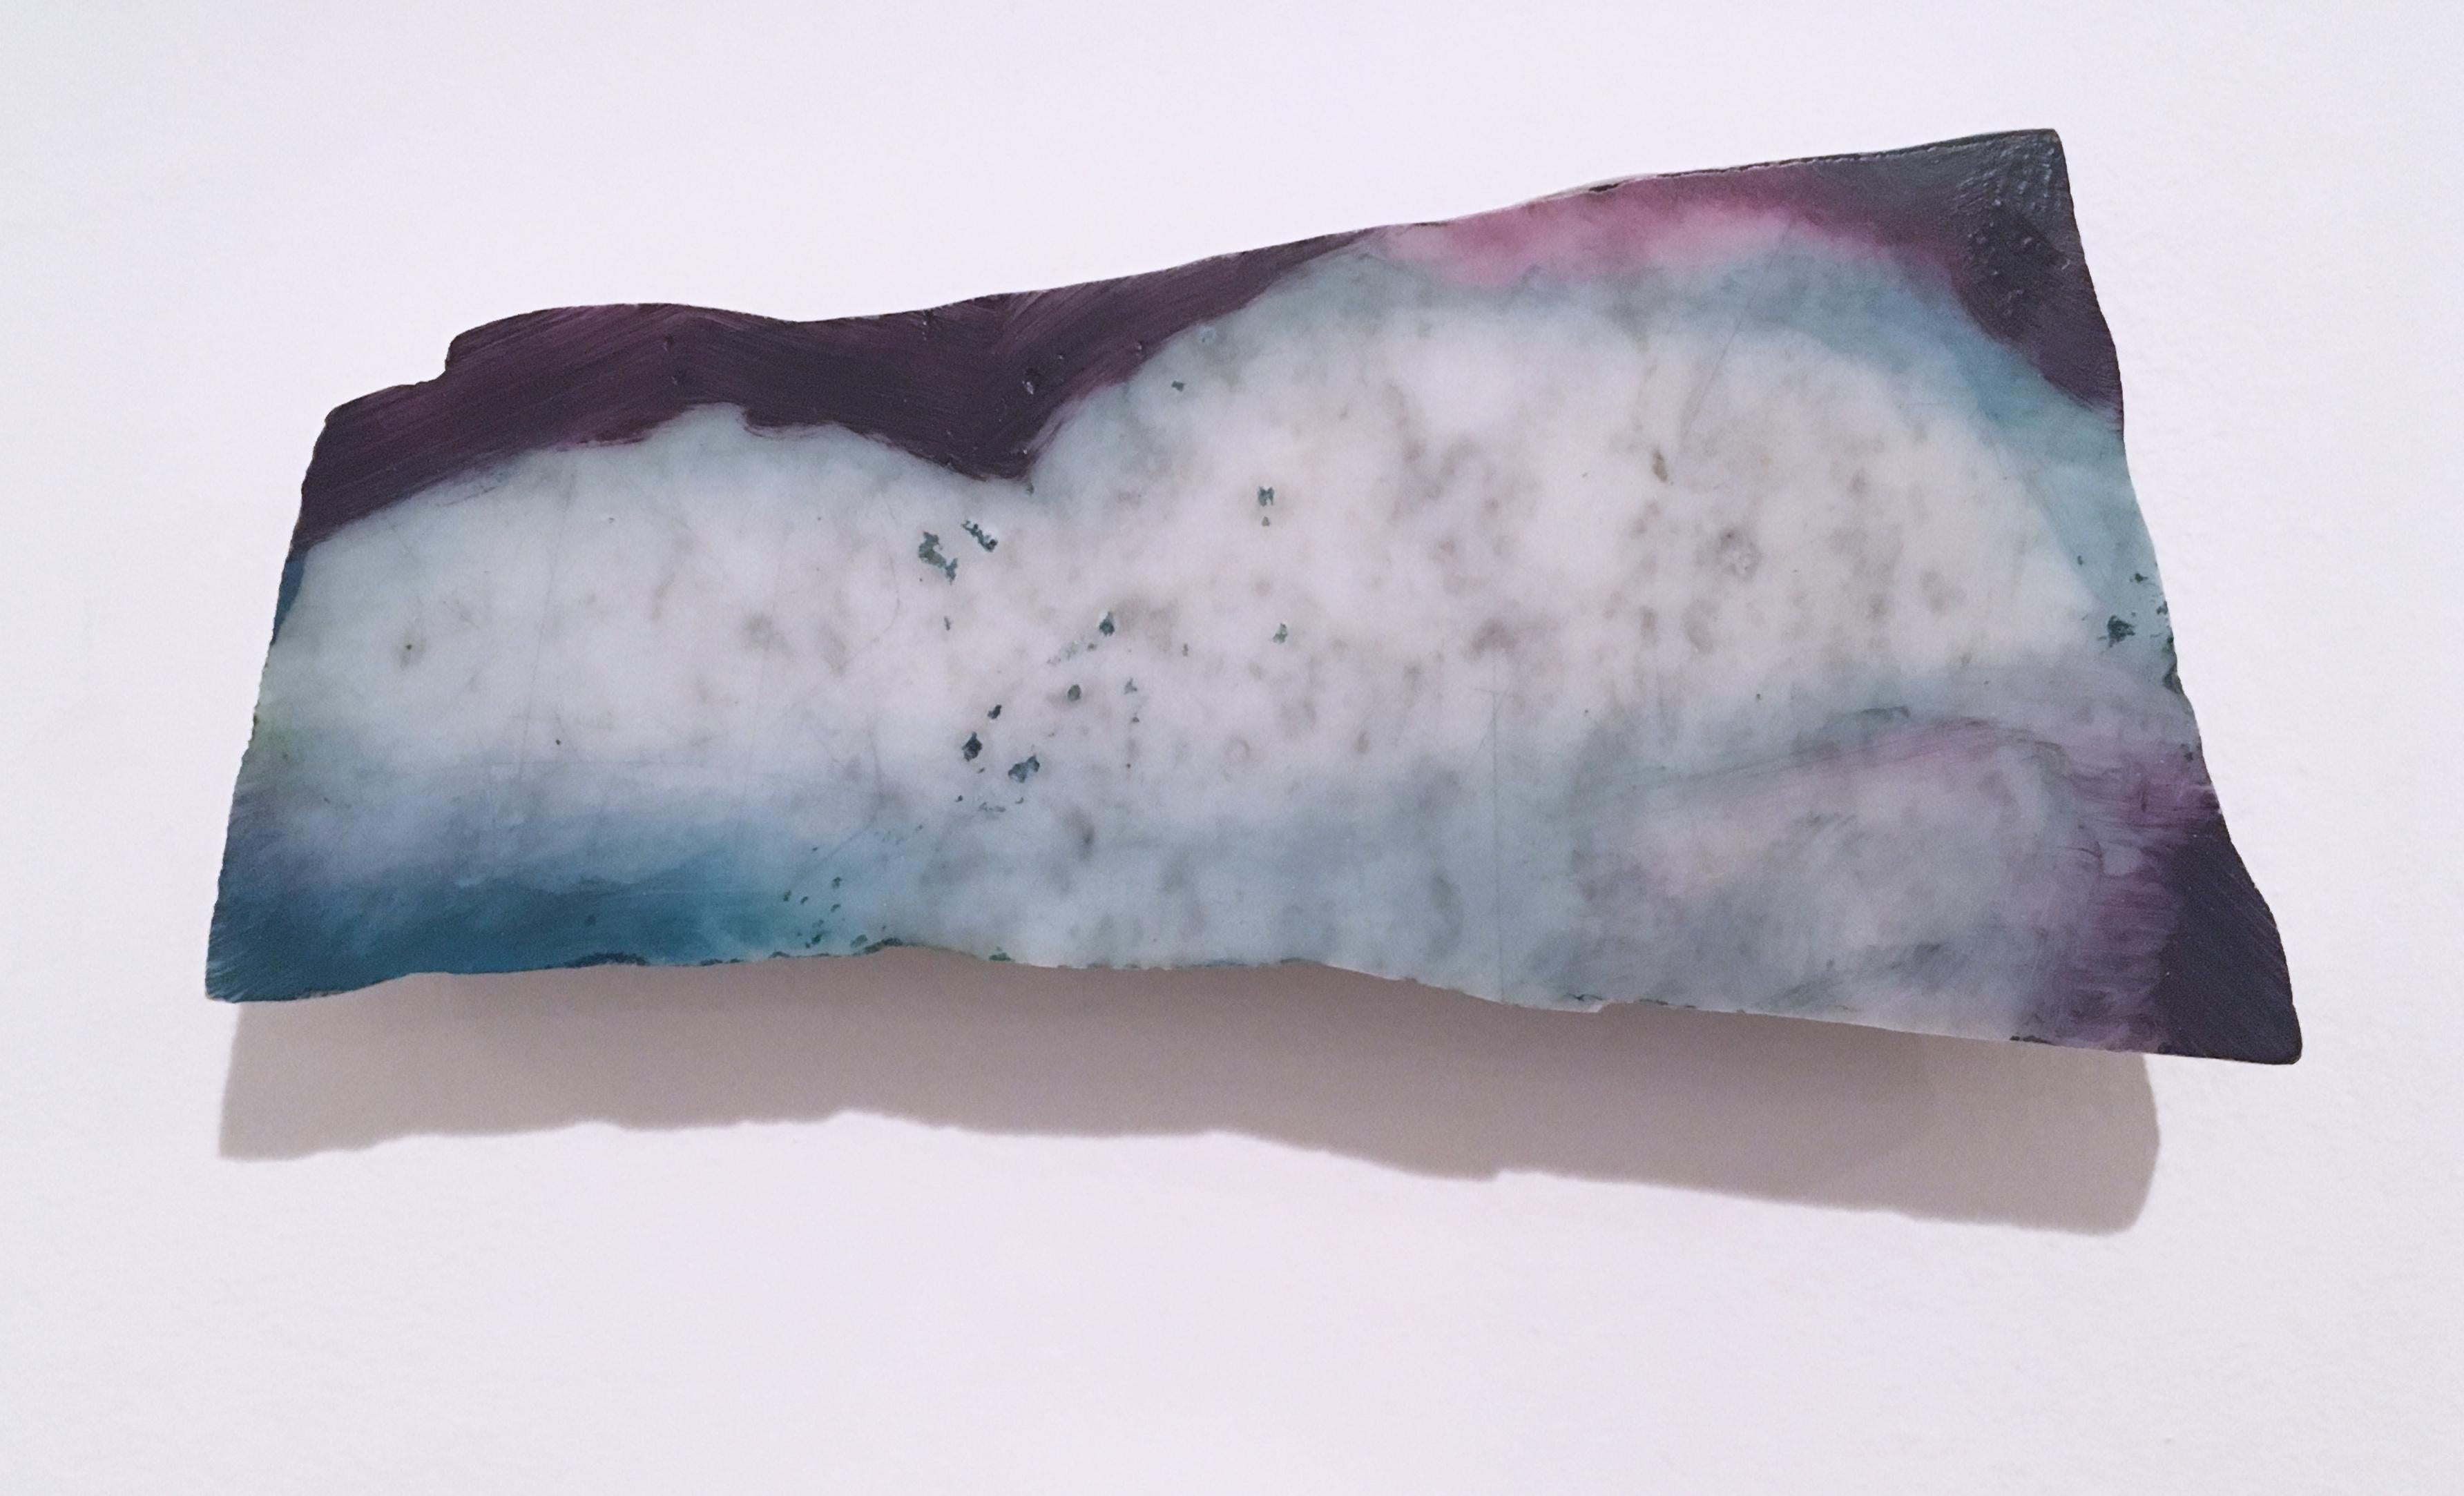 Tom Banks Abstract Sculpture - Untitled "Marble Fragment 4" 2019, oil, landscape, wall sculpture, clouds, blue